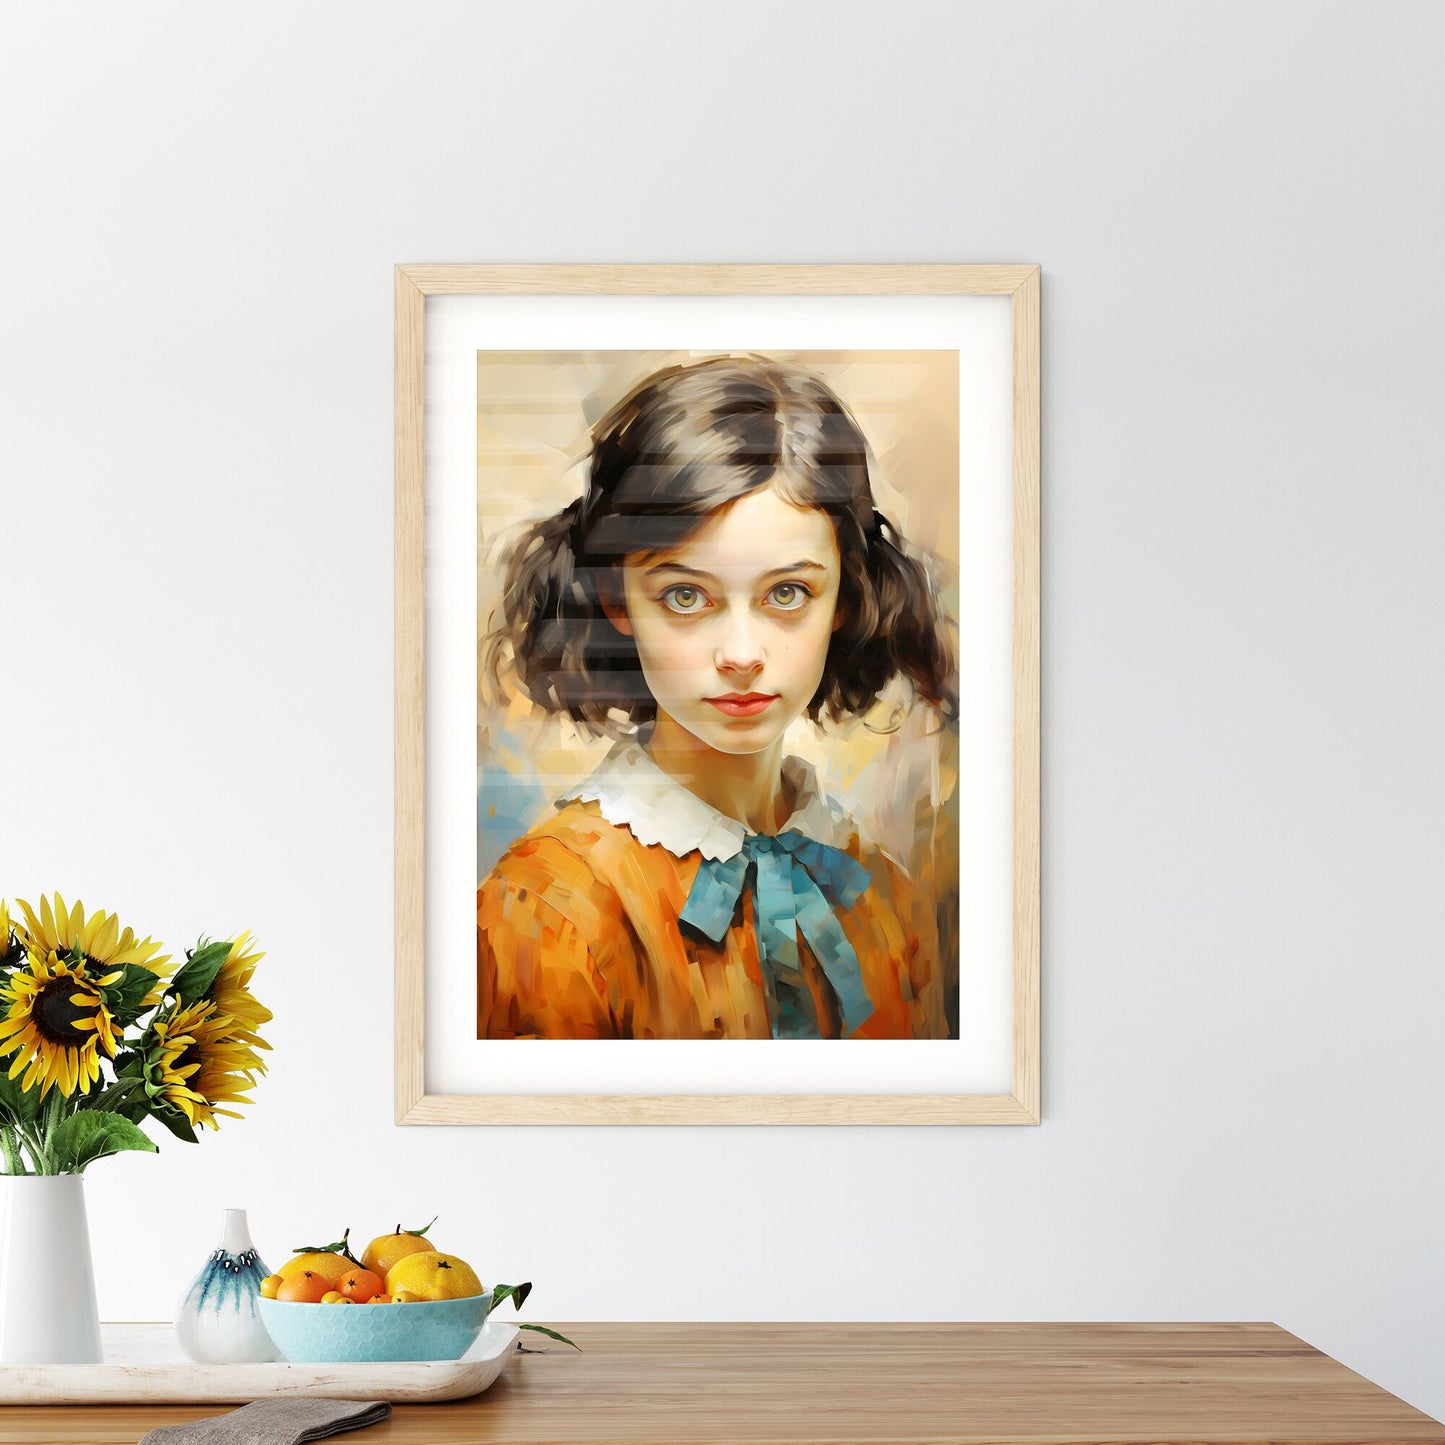 Anne Frank German-Born Jewish Diarist - A Girl With Brown Hair And A Blue Bow Default Title